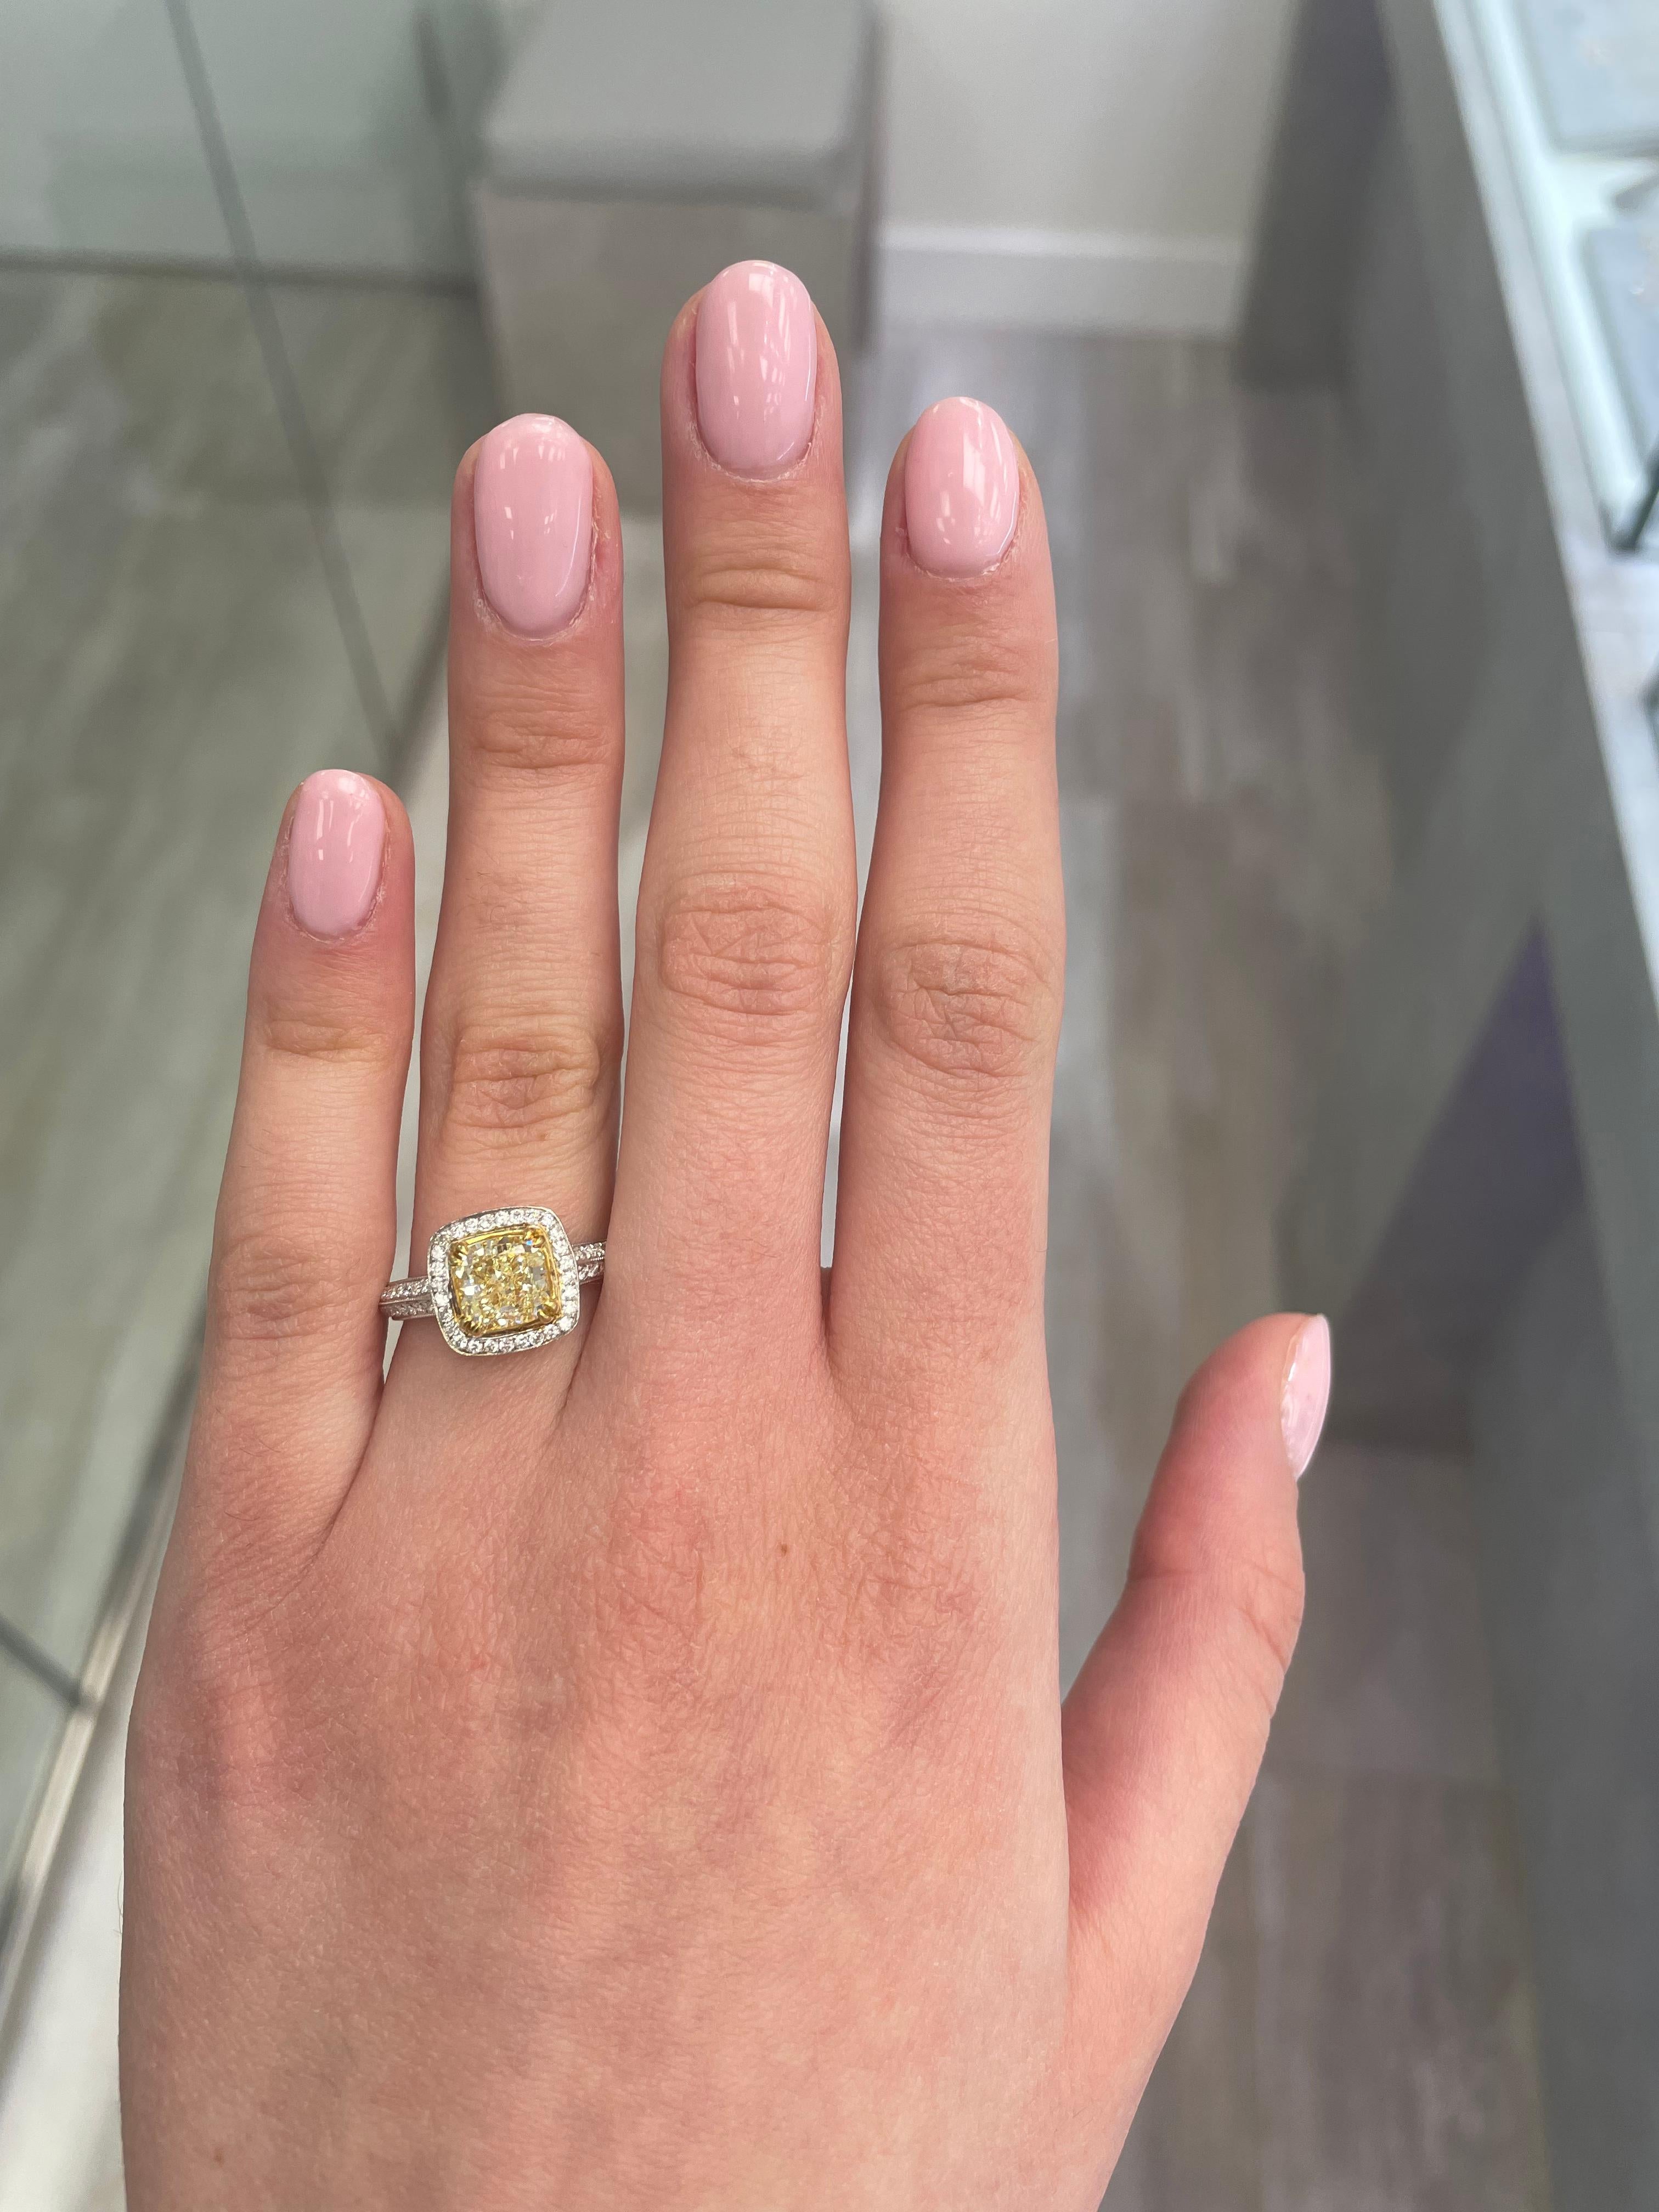 Stunning modern EGL certified fancy intense yellow diamond halo ring, two-tone 18k yellow and white gold. By Alexander Beverly Hills
2.07 carats total diamond weight.
1.73 carat cushion Fancy Intense Yellow color and VS1 clarity diamond, EGL graded.